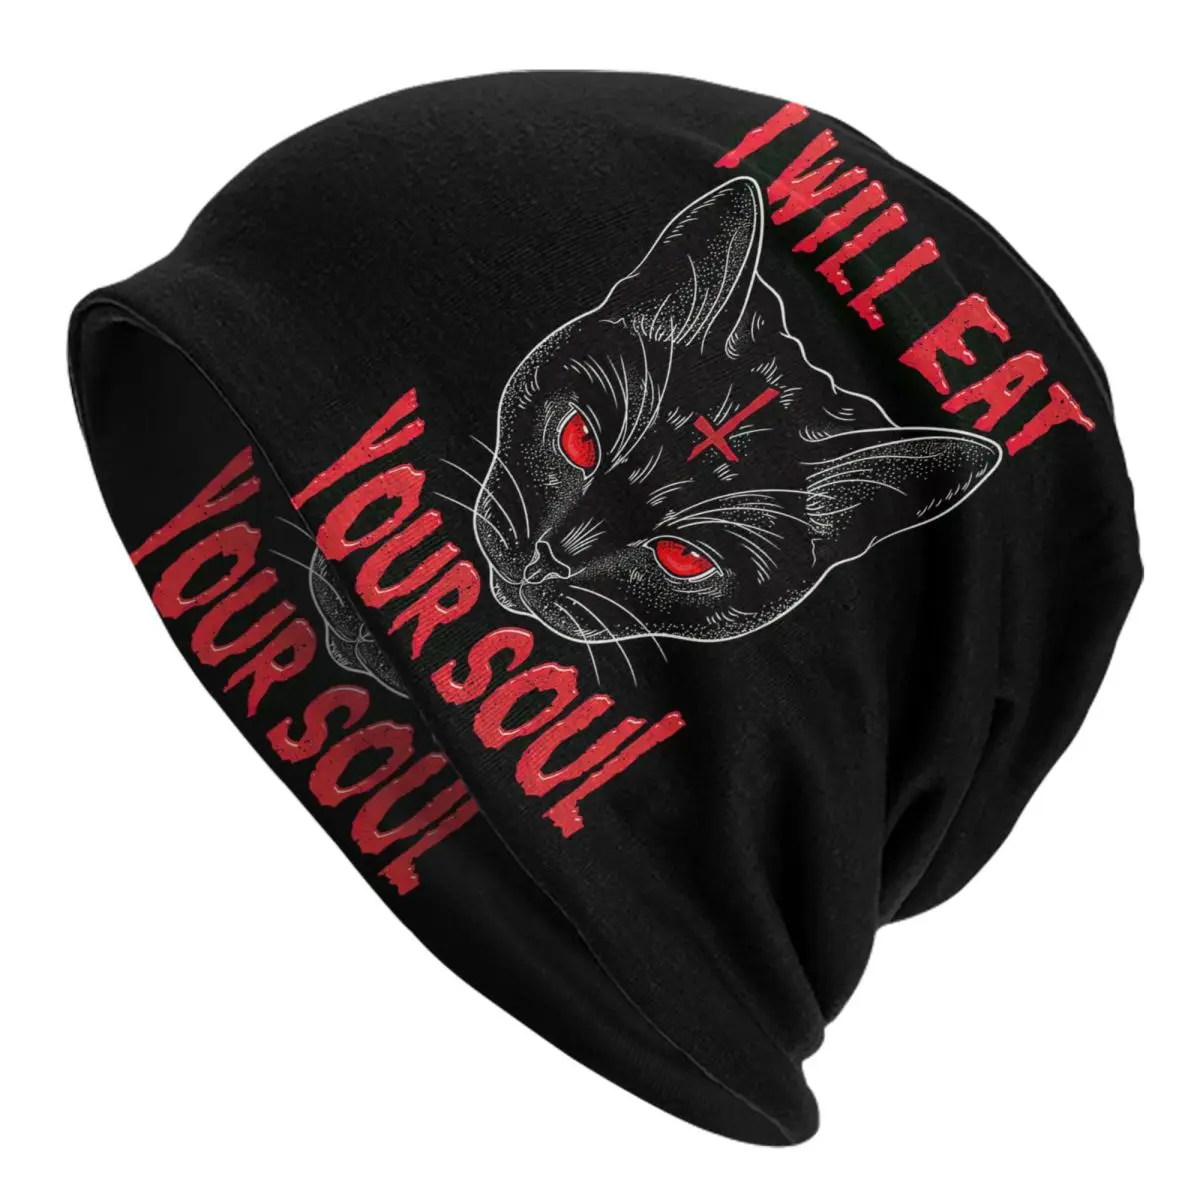 I Will Eat Your Soul I Satanic Occult Cat Design Adult Men's Women's Knit Hat Keep warm winter Funny knitted hat